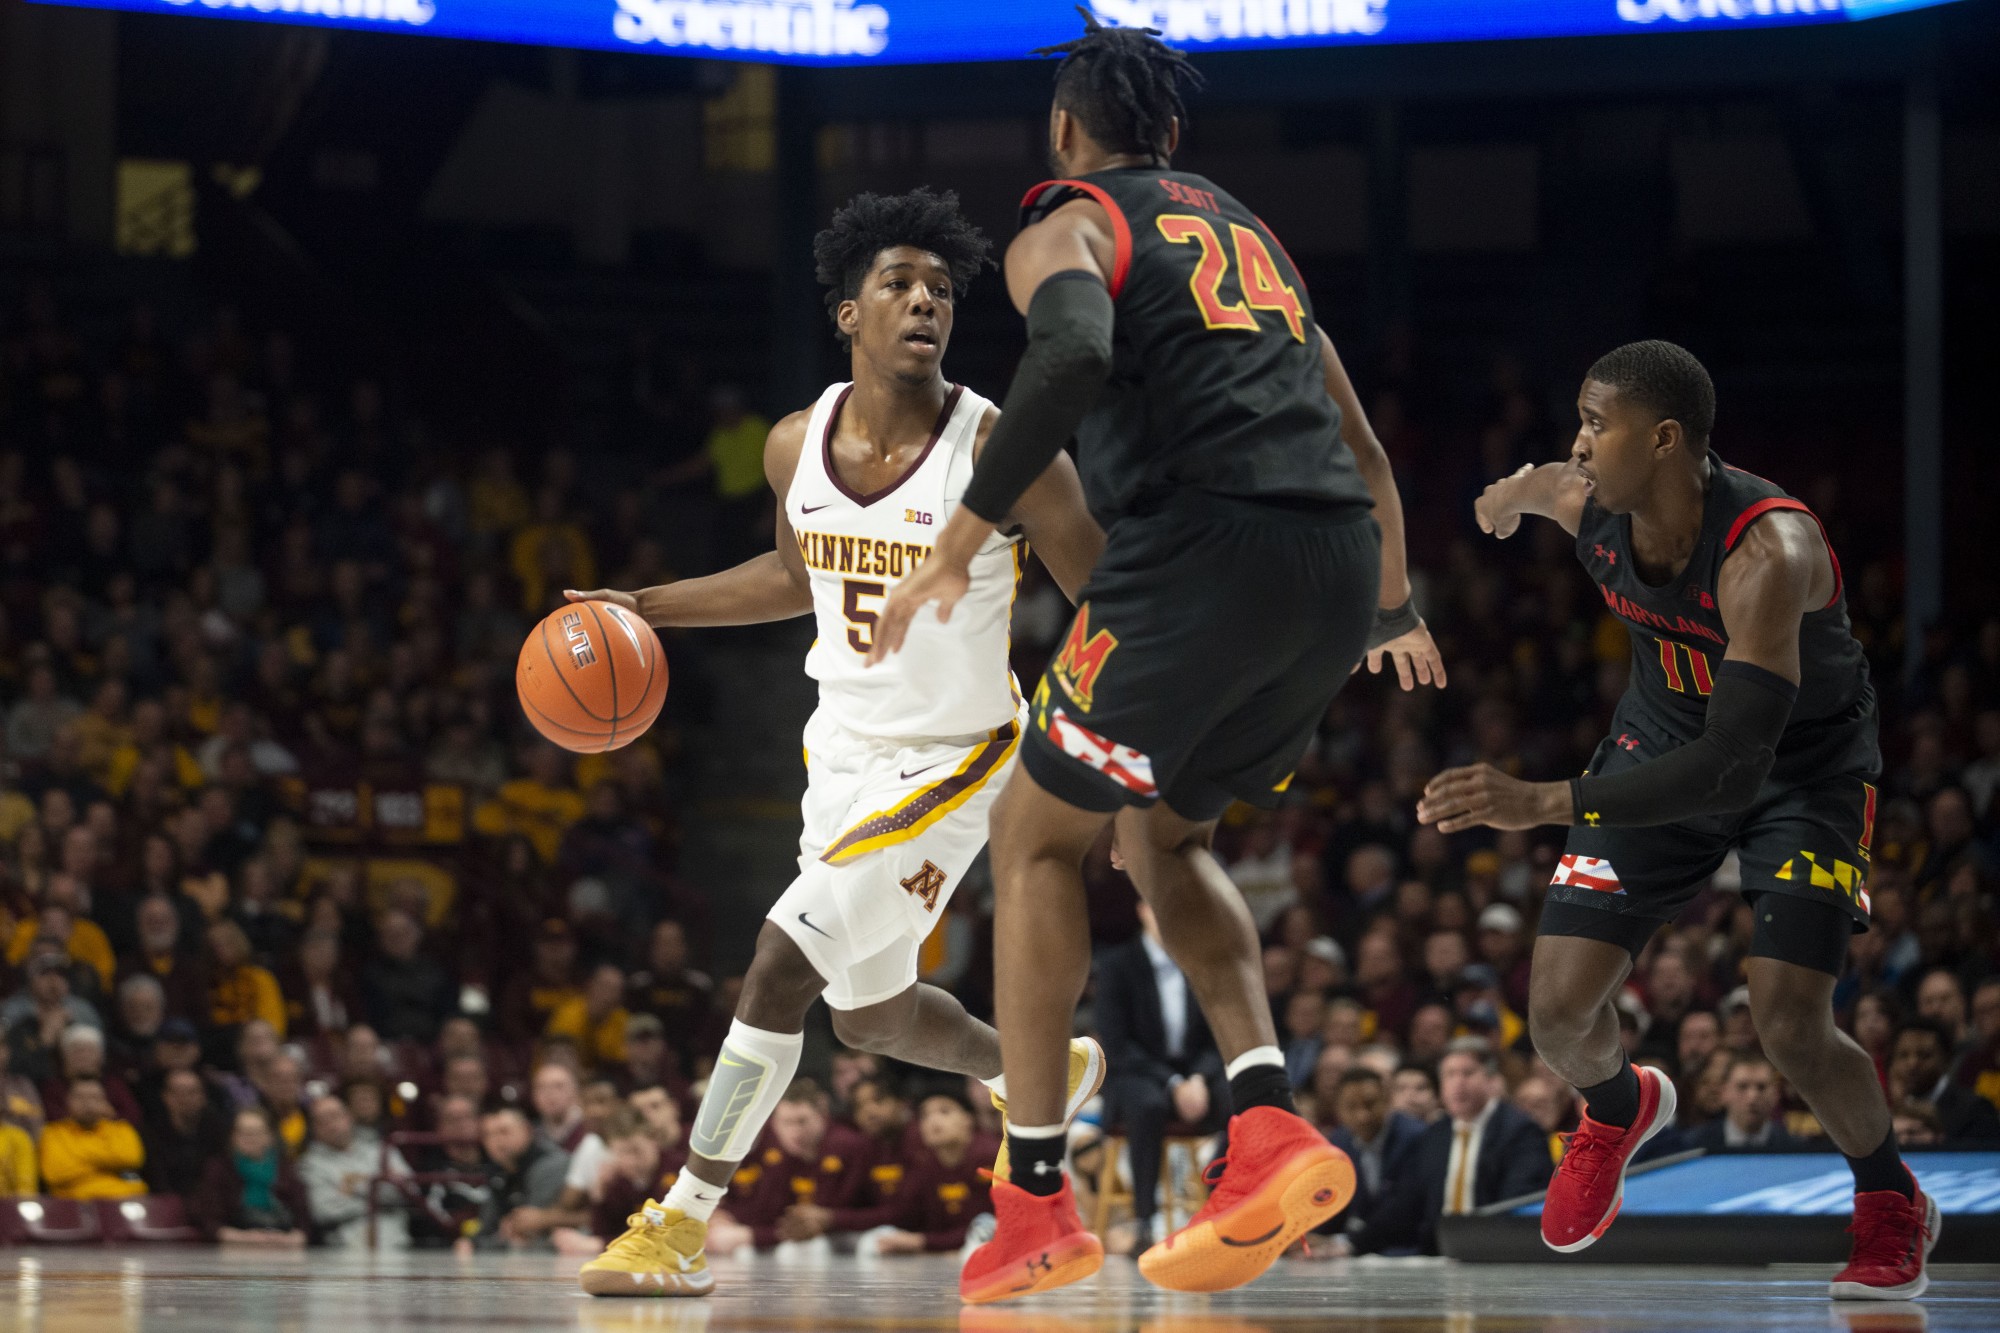 Guard Marcus Carr brings the ball up the court at Williams Arena on Wednesday, Feb. 26. The Gophers finished the half with a 47-31 lead over the Maryland Terrapins. 